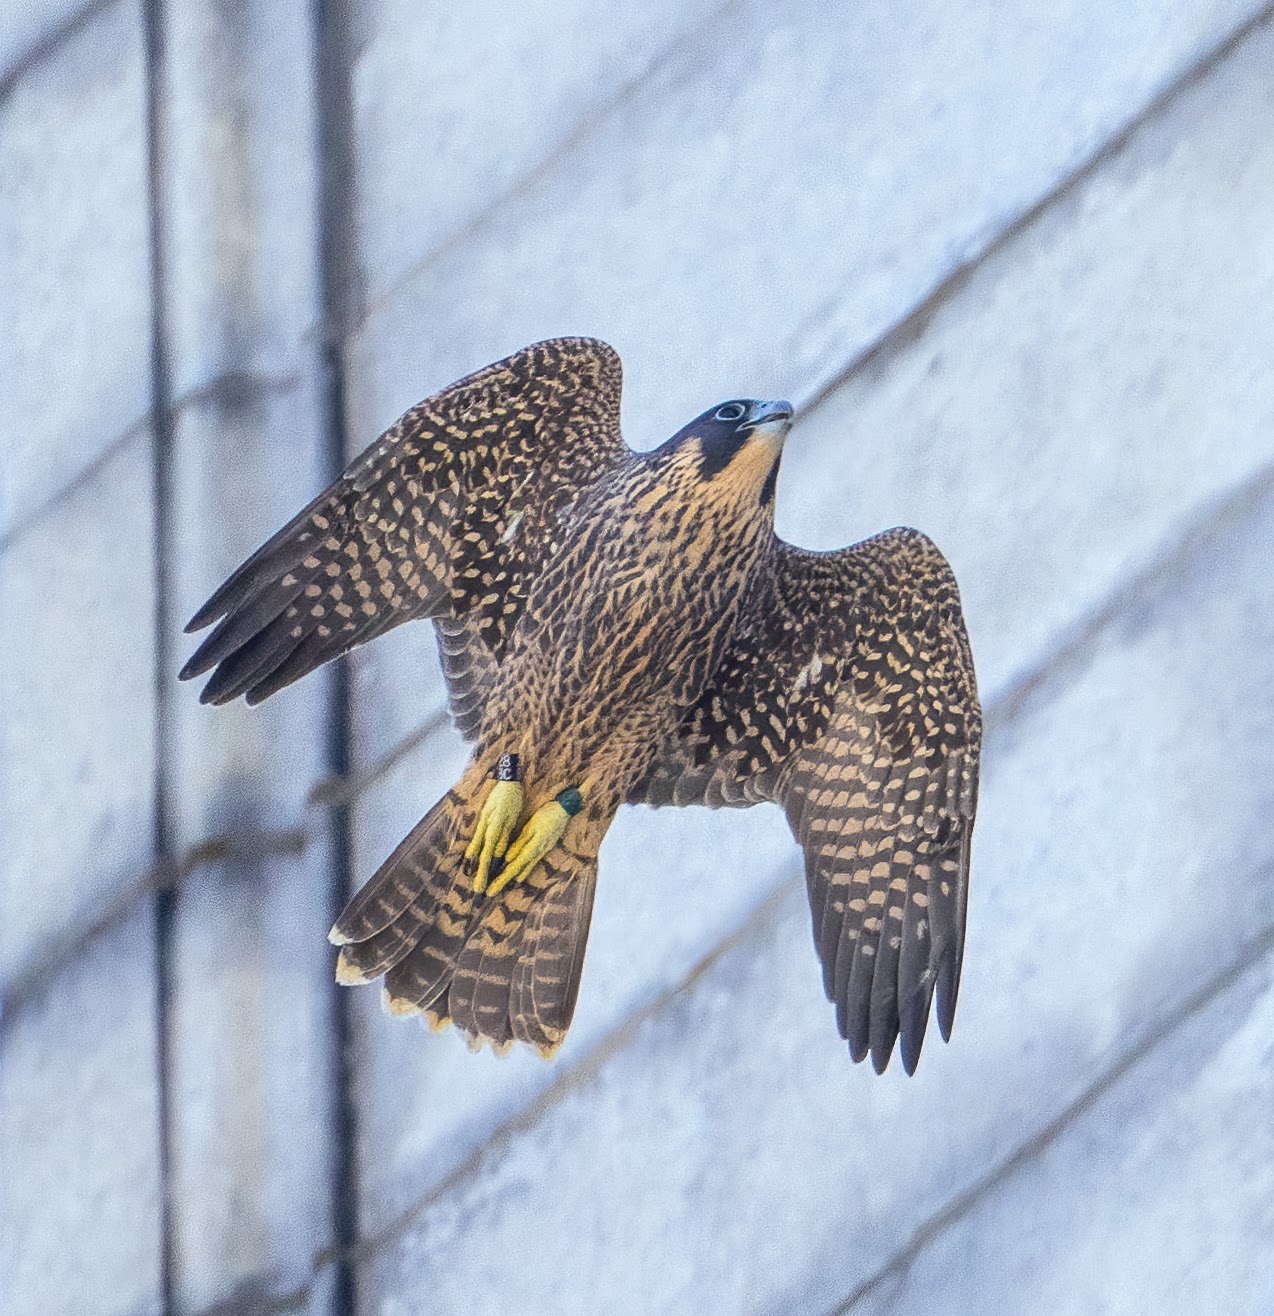 Aurora, one of the two female falcons that hatched this year in April, practices flying on Wednesday morning, June 5.